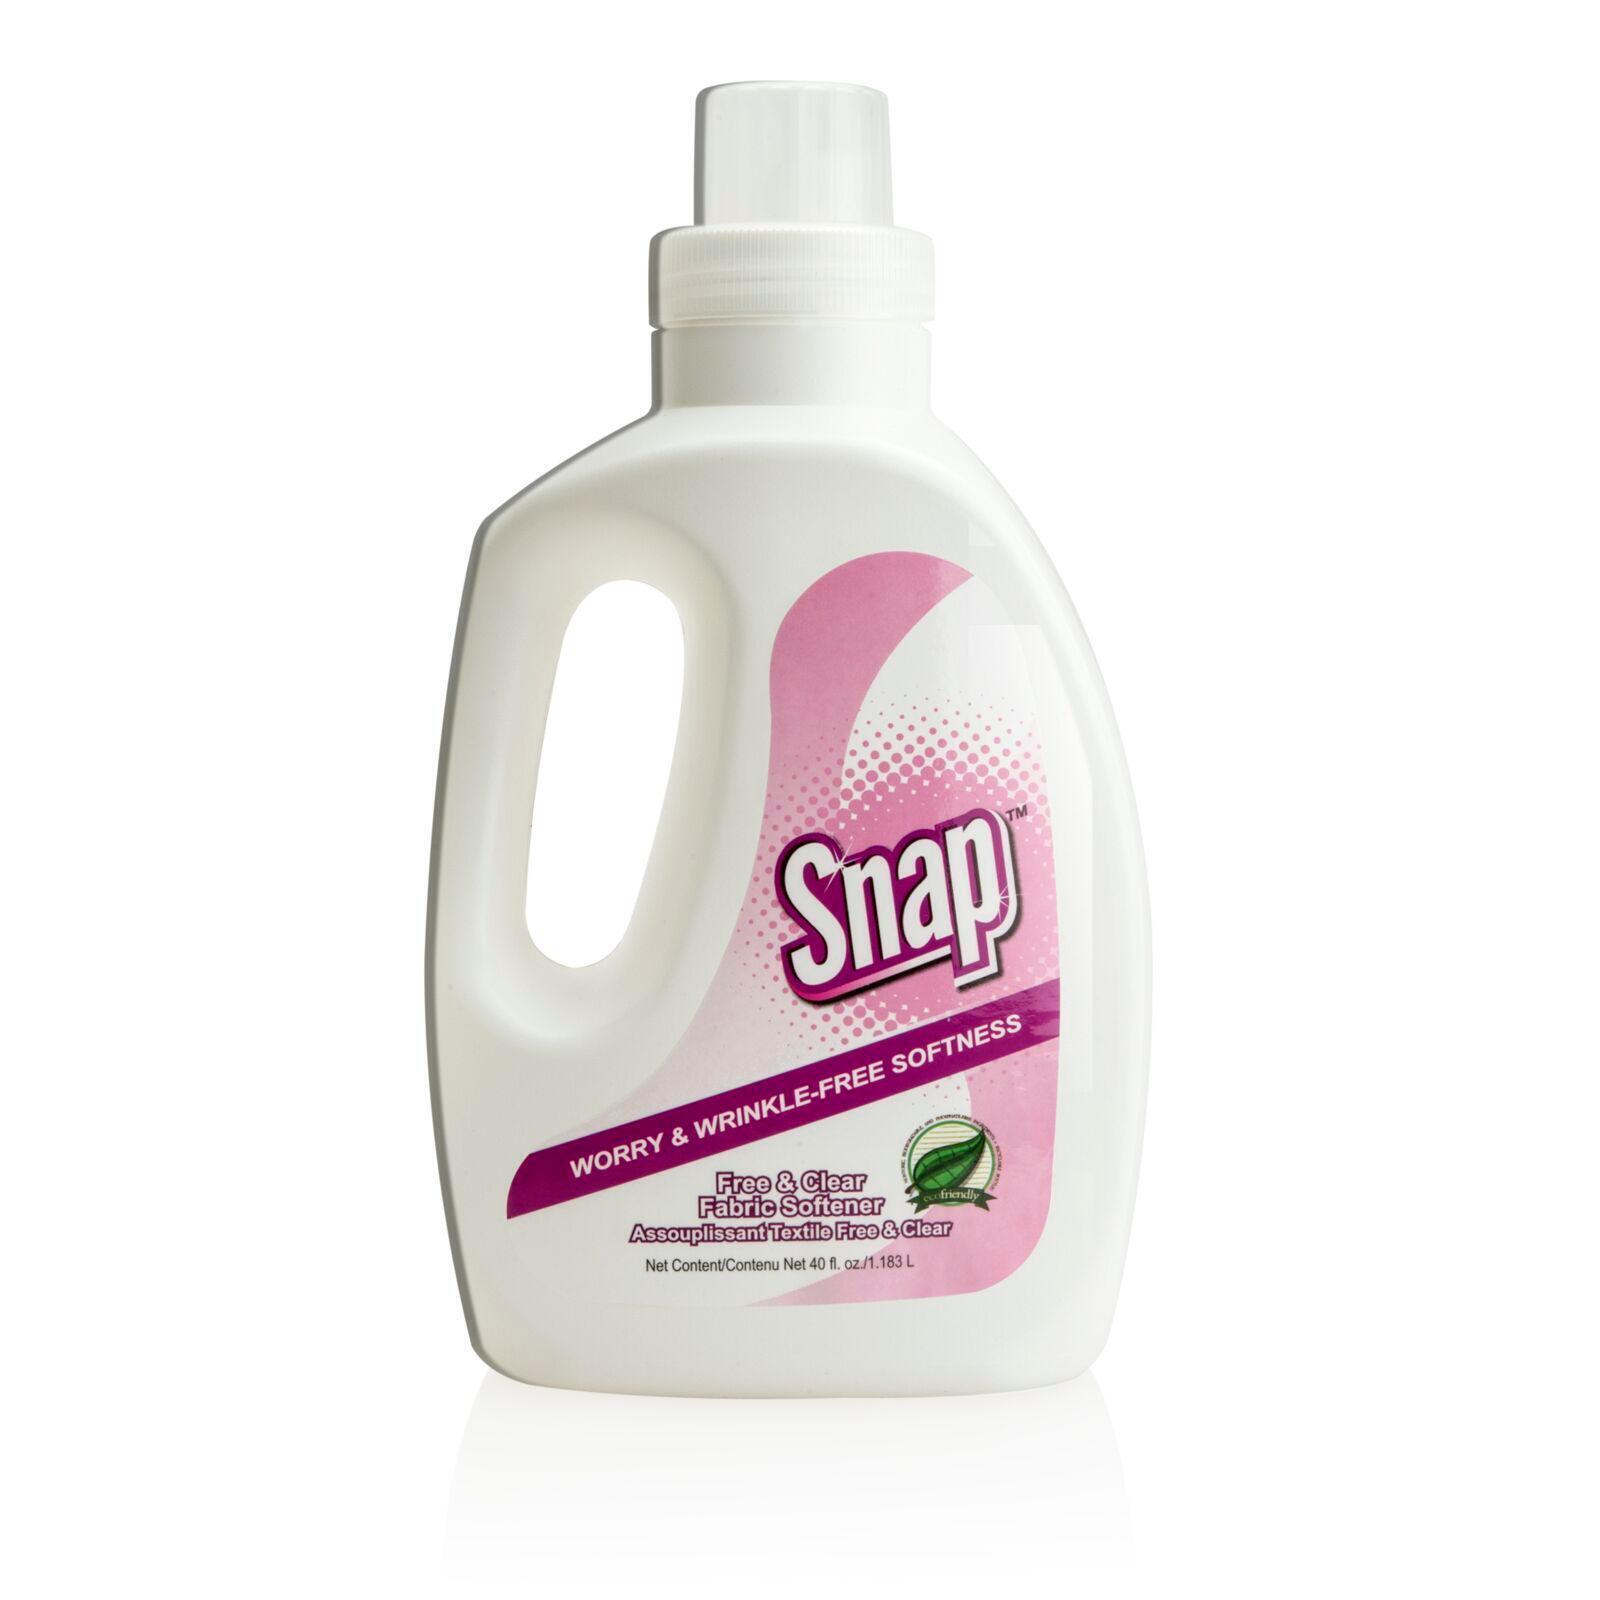 Snap® Free & Clear Fabric Softener